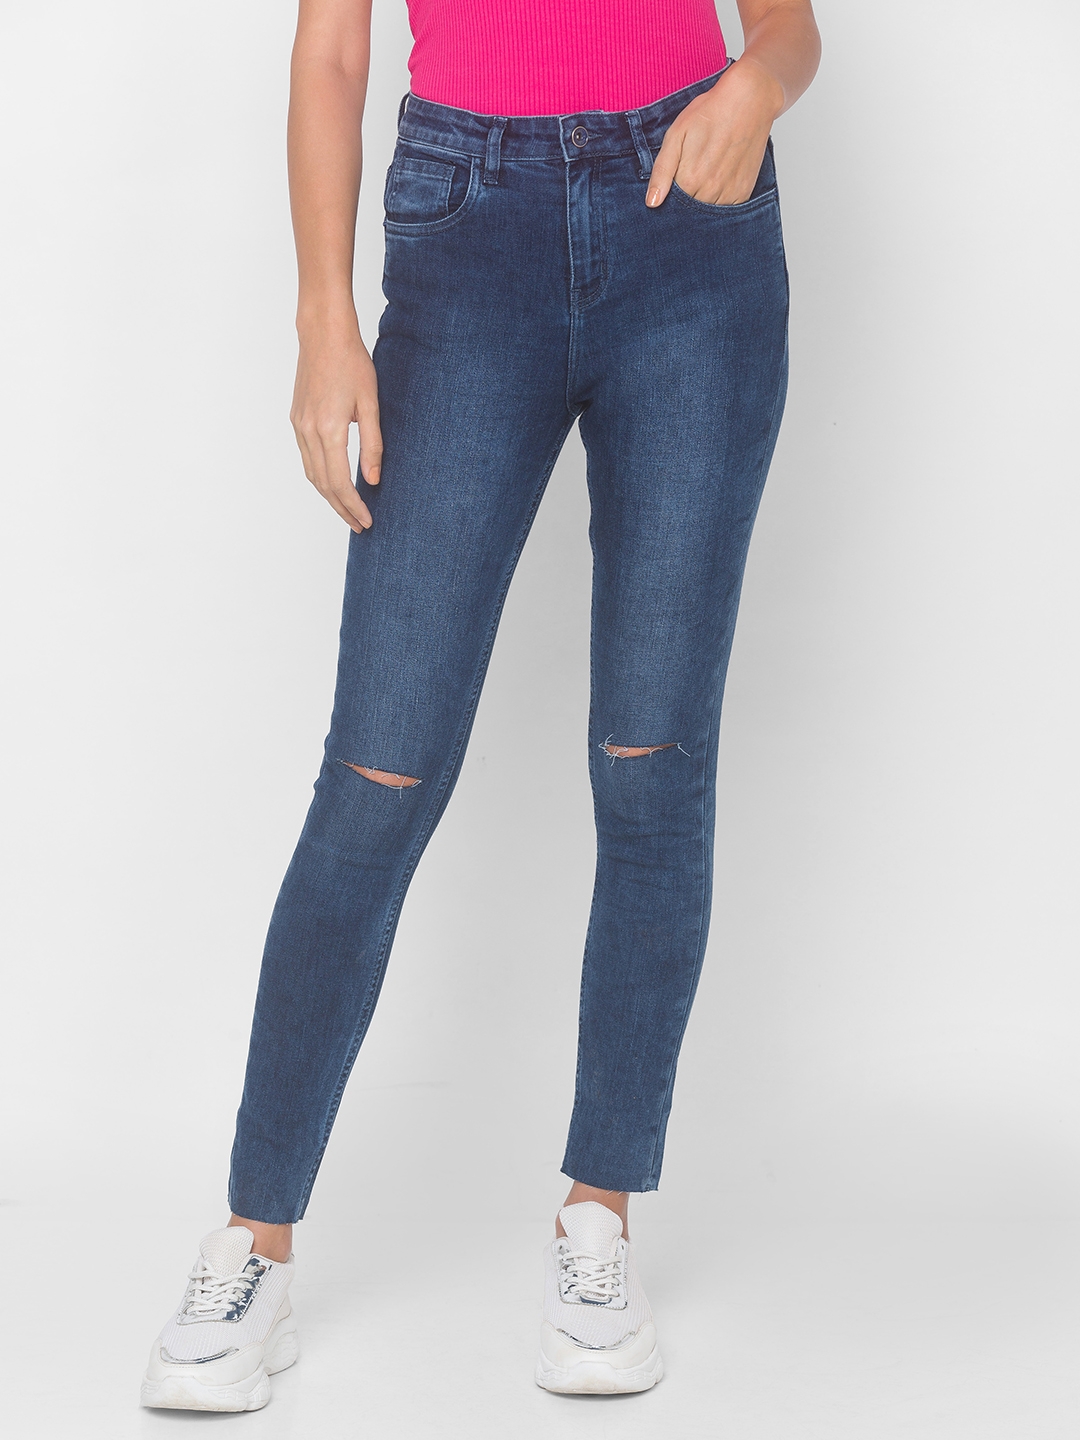 globus | Women's Blue Cotton Solid Ripped Jeans 0